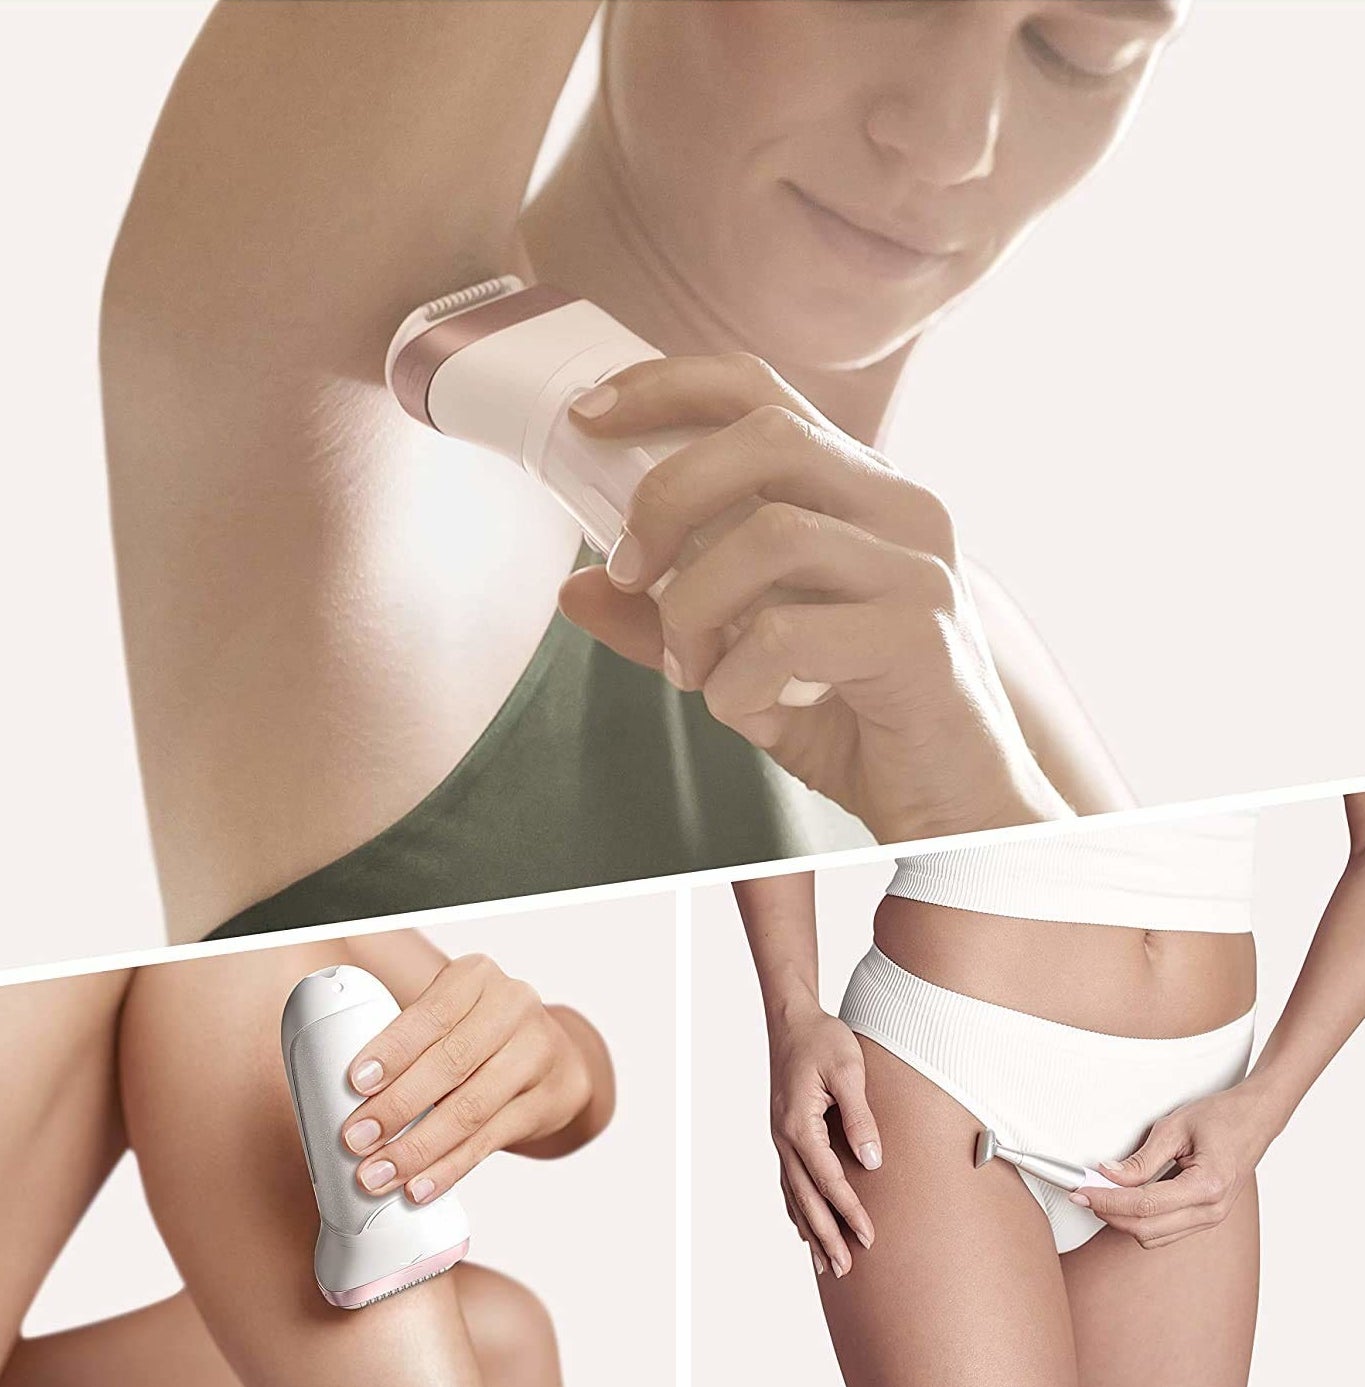 woman using the epilator on her underarms, legs, and using the bikini trimmer